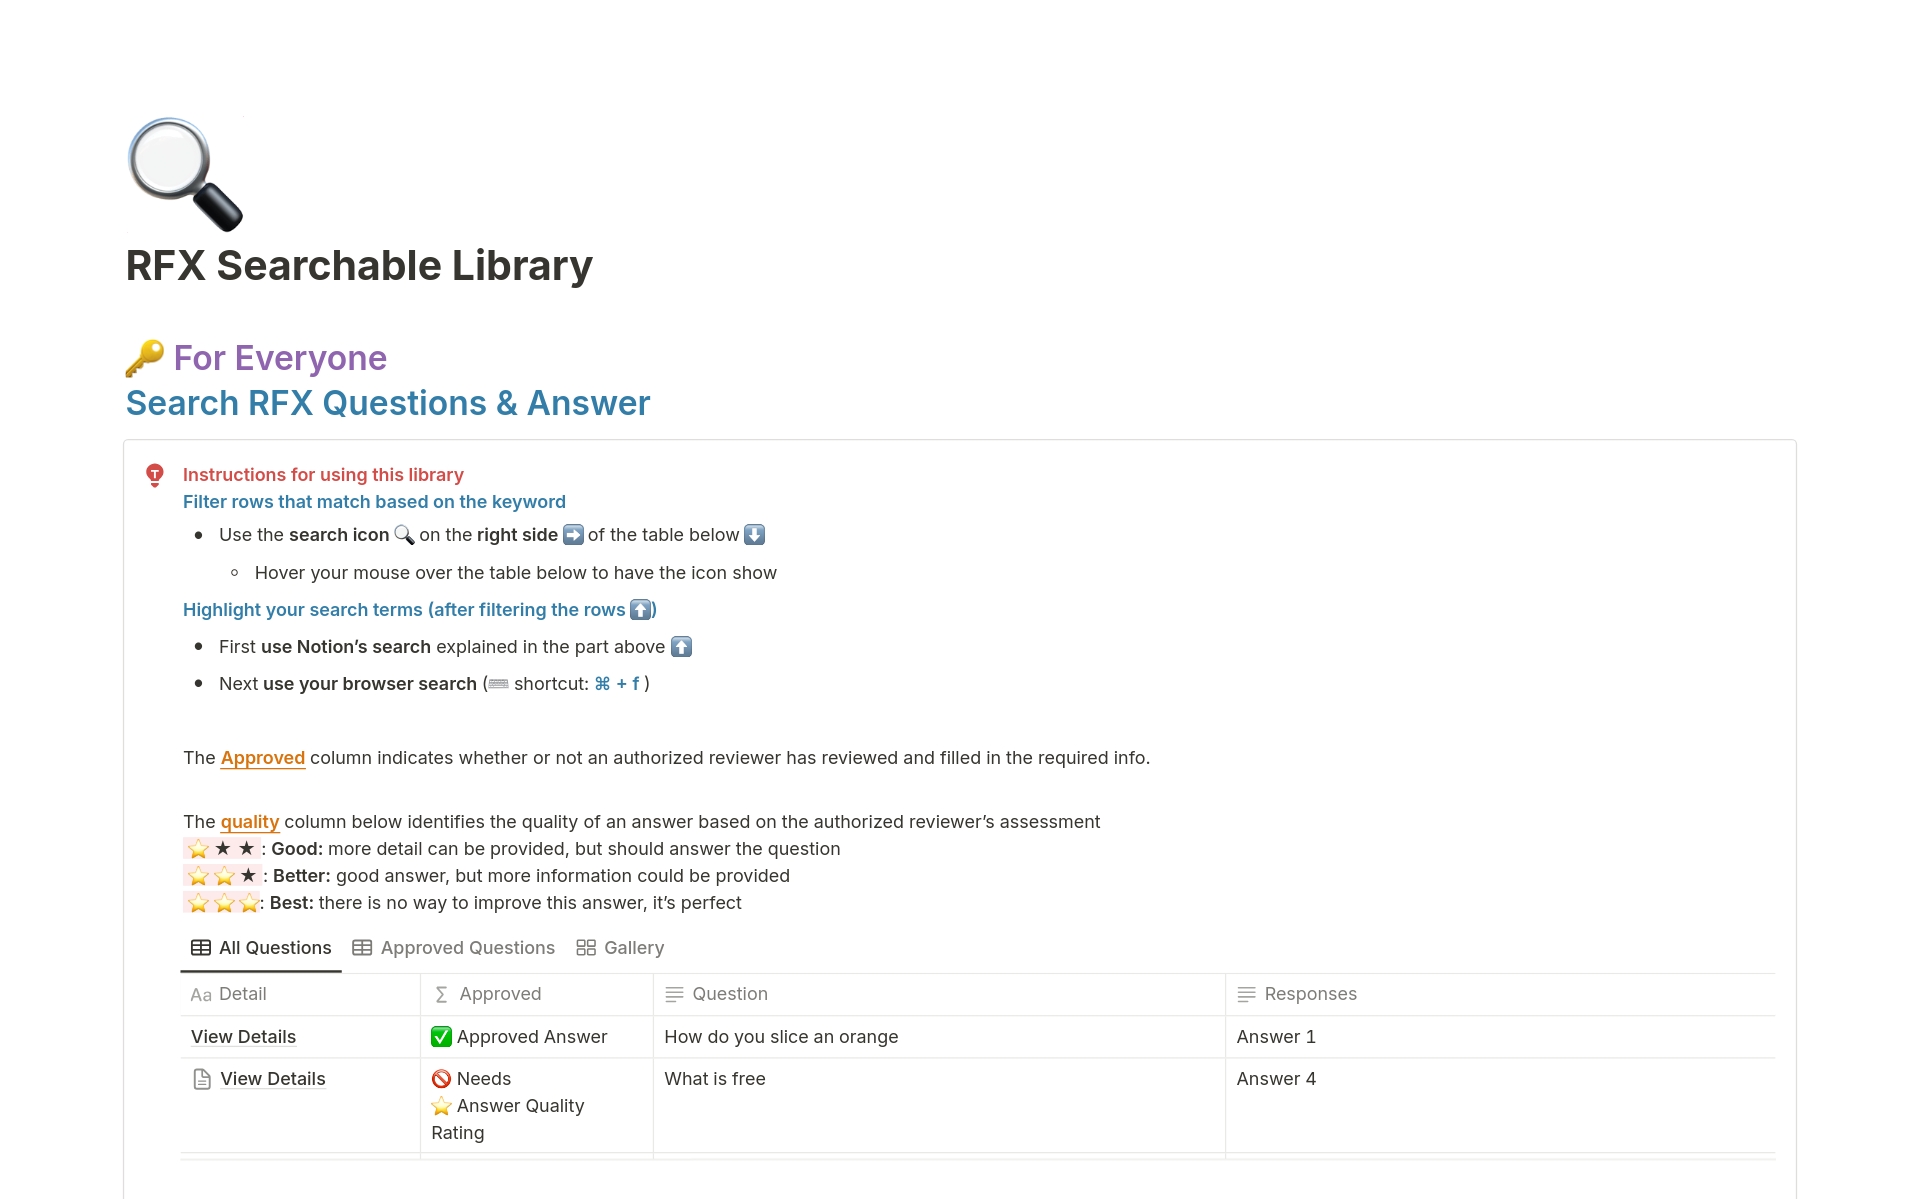 This is a tool to help teams maintain their library of questions and approved answers. Built to help expedite the RFQ, RFP, RFI, Security Questionnaire, and Due Diligence Questionnaire processes. Designed with scalability and accountability in mind.